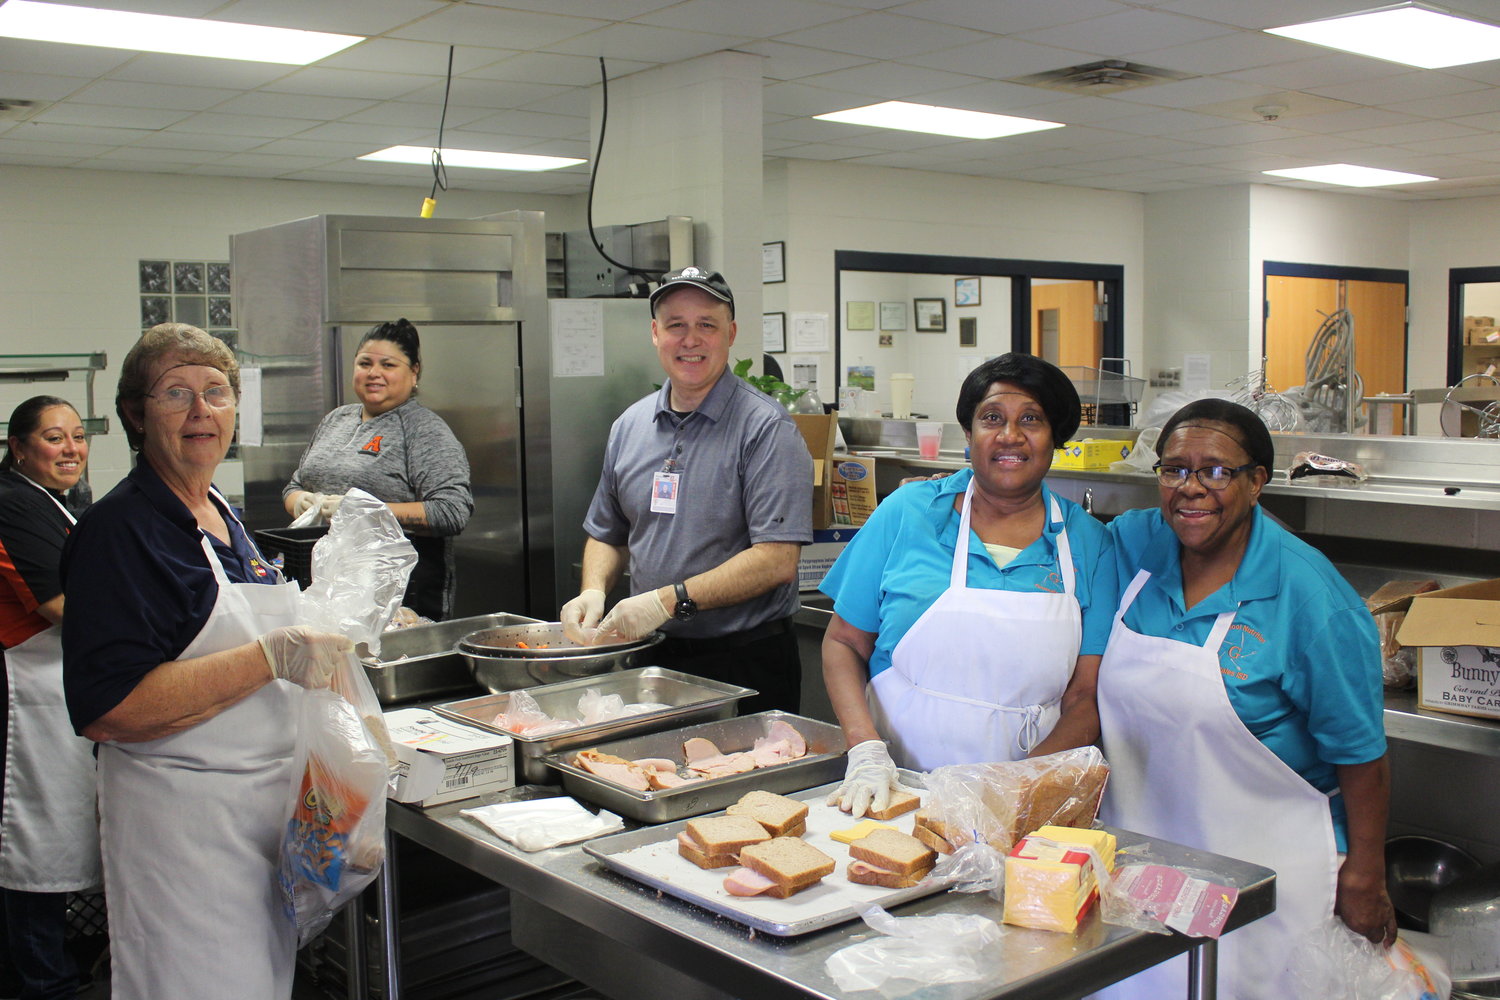 Local school districts (including Gonzales ISD, pictured here) began their curbside meal service this week, providing free breakfast and lunch meals for all children 18 years and younger.